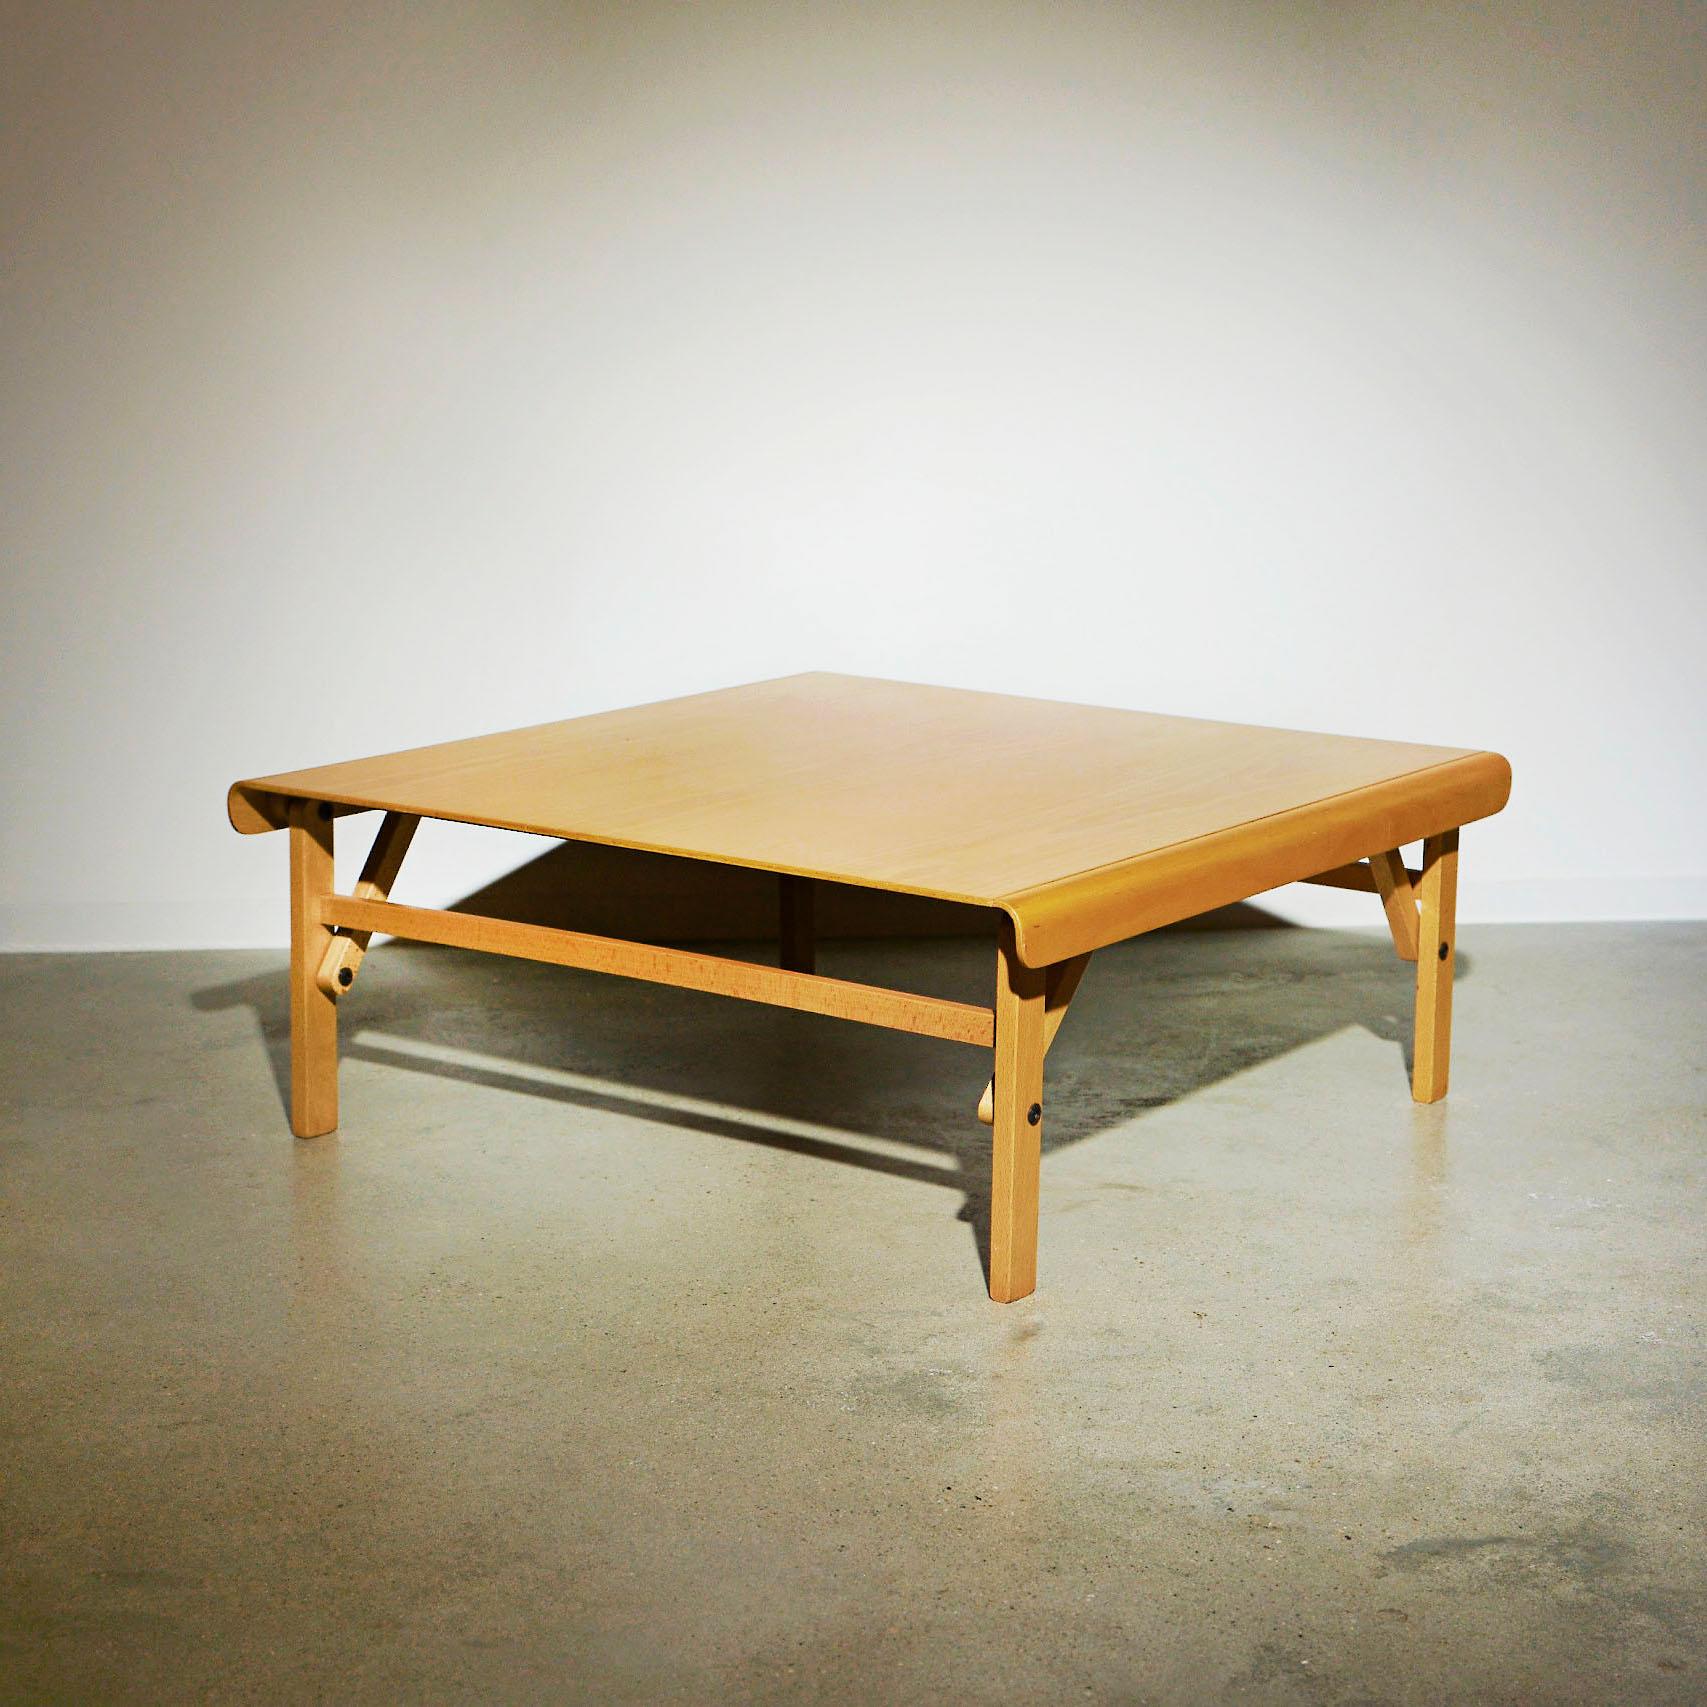 ‘Bass’ coffee table in beech wood by Achille Castiglioni

Manufactured by BBB Bonacina in 1979.

Additional information: 
Material: beech wood and beech plated curved plywood
Artist: Achille Castiglioni
Size: 80 W X 80 D X 30 H cm.